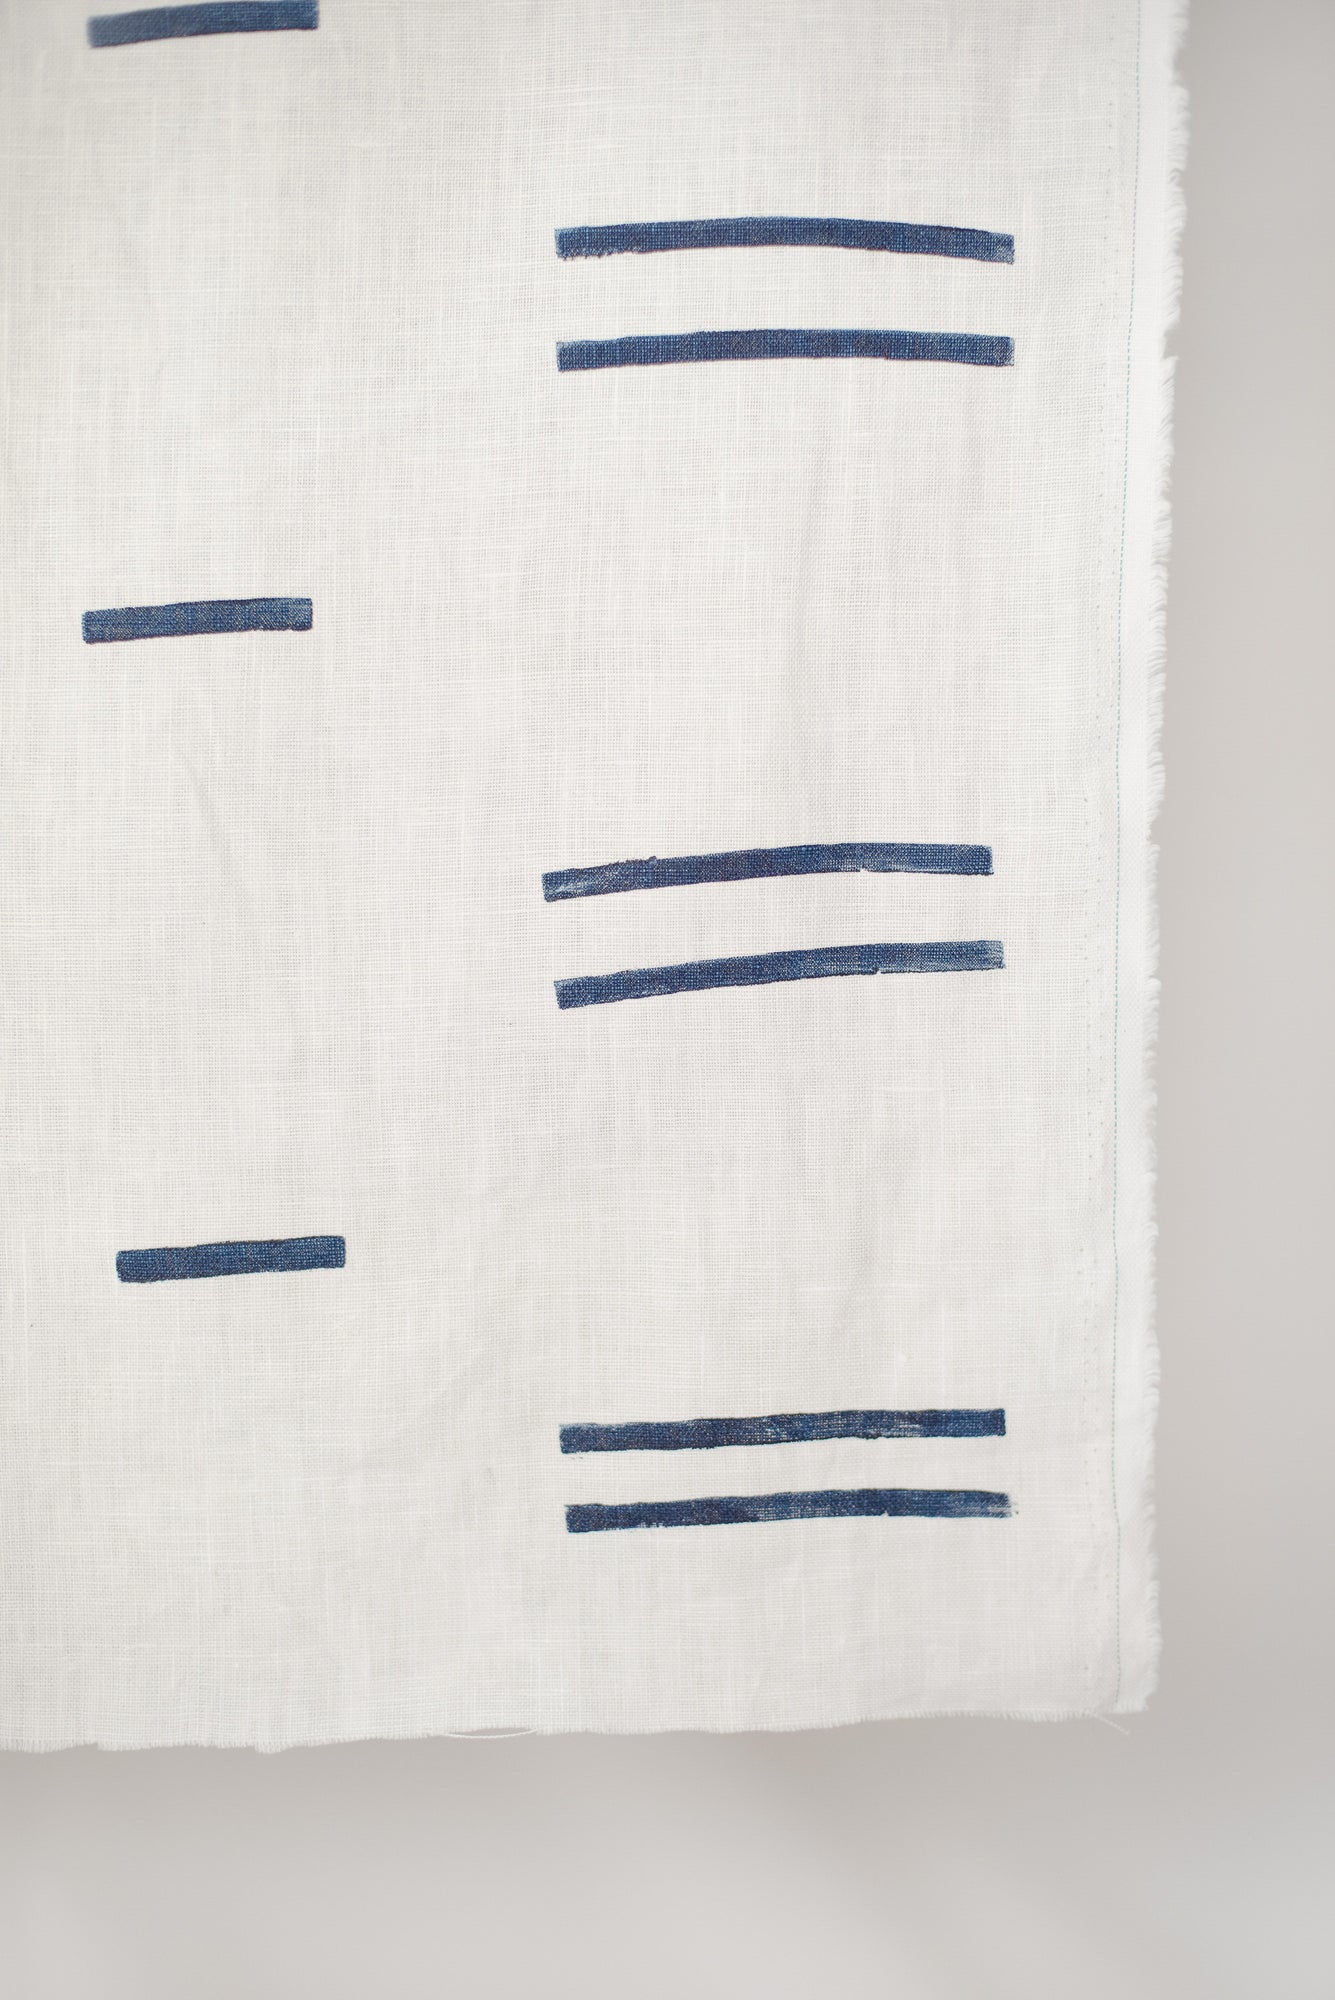 Oaxaca Navy on White - Fabric By The Yard